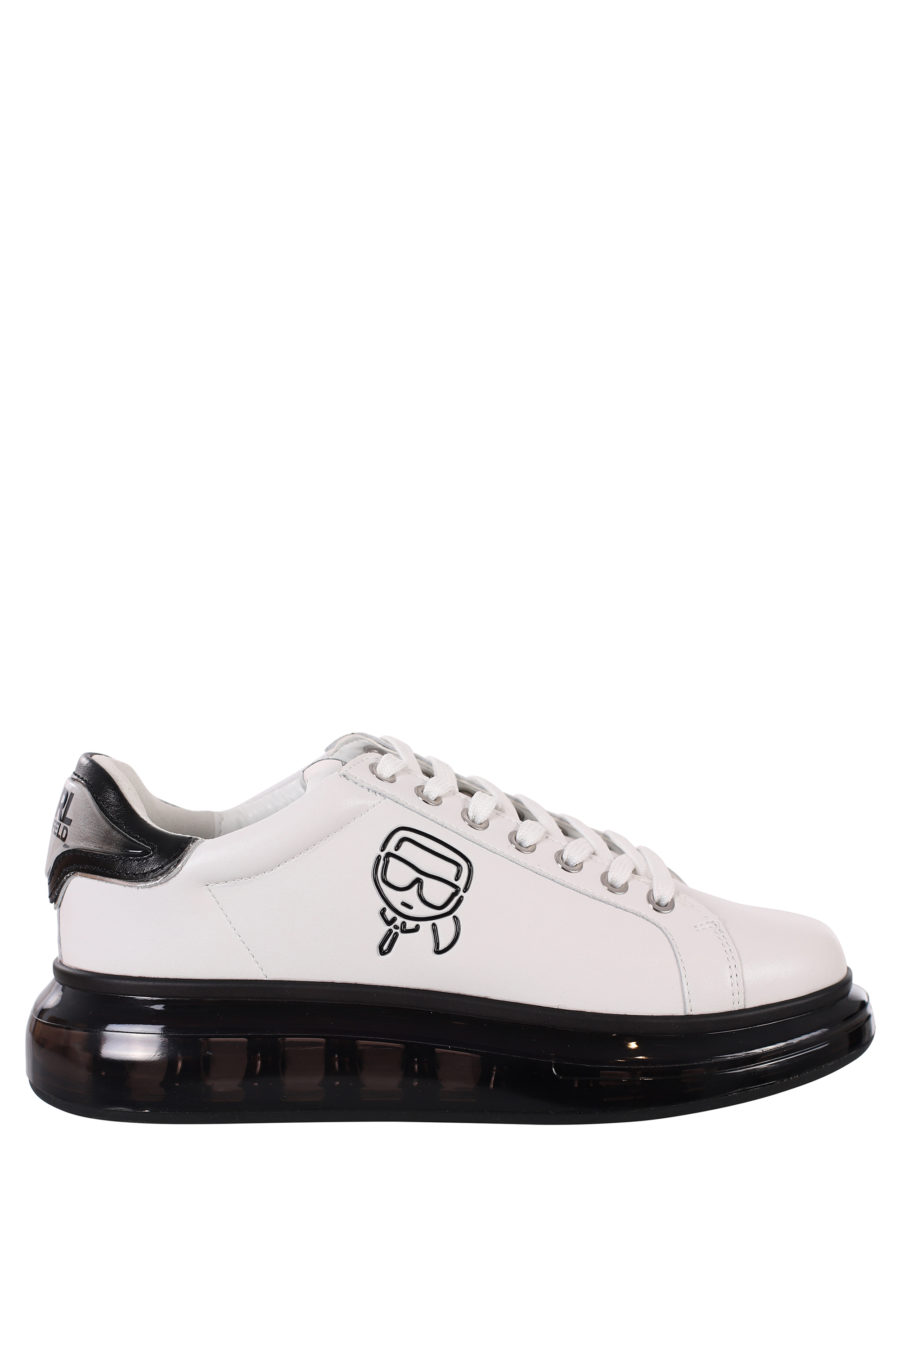 White trainers with black silhouette logo and black sole - IMG 0419